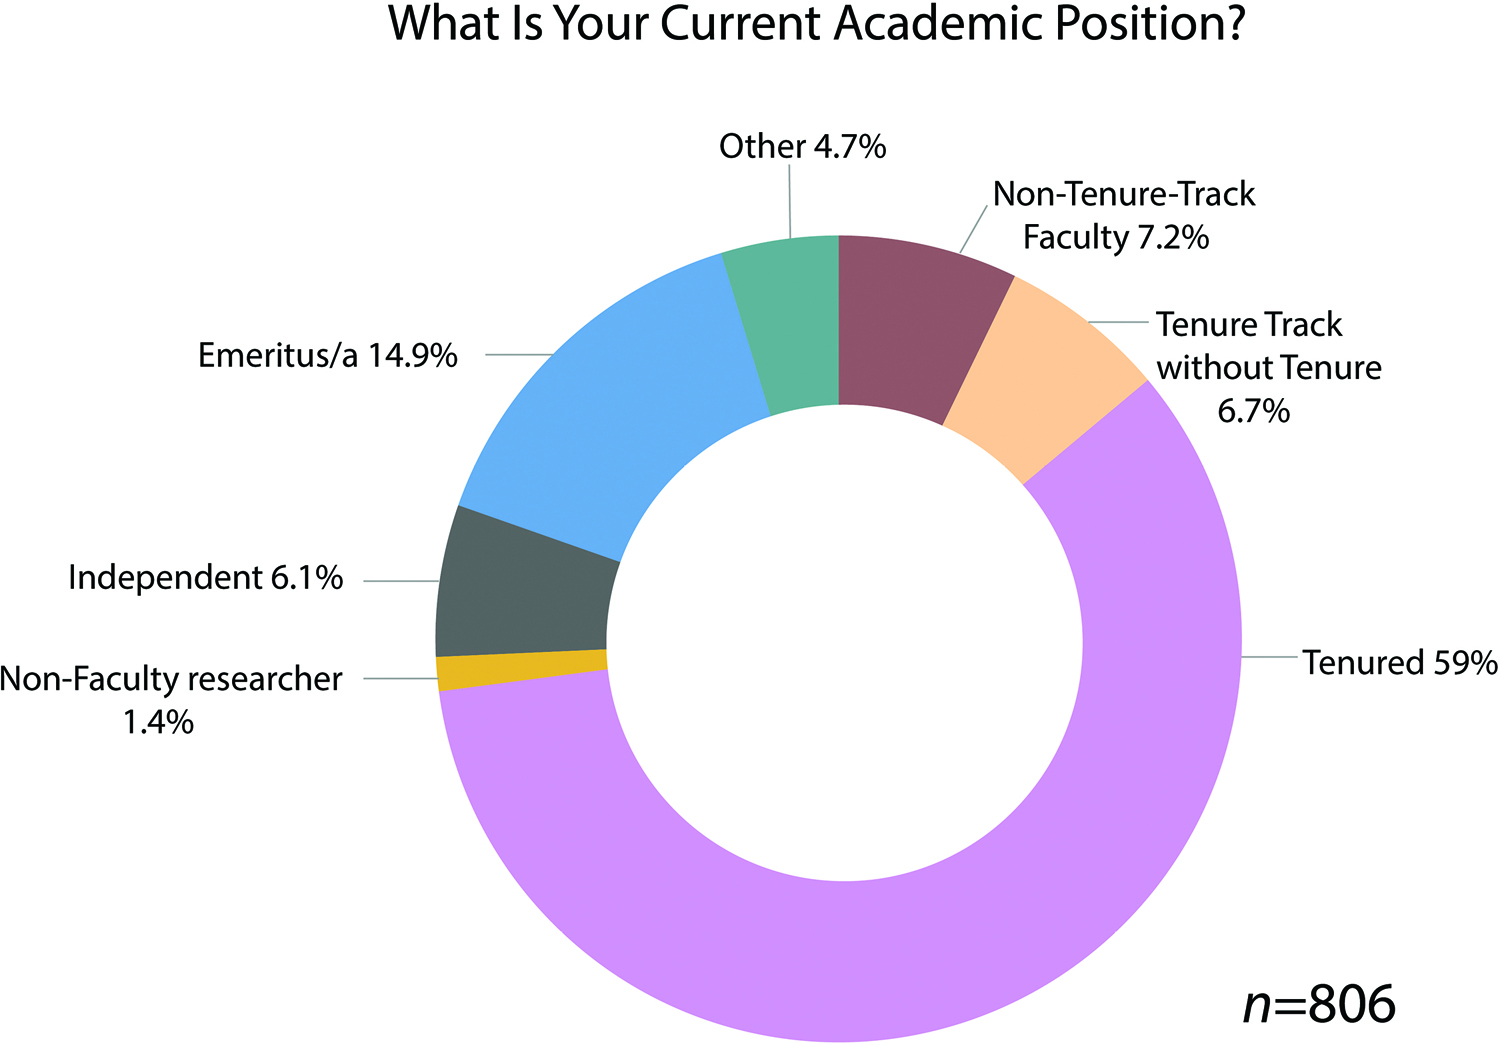 A pie chart graph with different sections representing the percentage of survey population of 806 respondents. 59% Tenured; 6.7% Tenure Track without Tenure; 7.2% Non-tenure track faculty; Other 4.7%; Emeritus or Emerita 14.9%; Independent 6.1% and non-faculty researcher 1.4%.